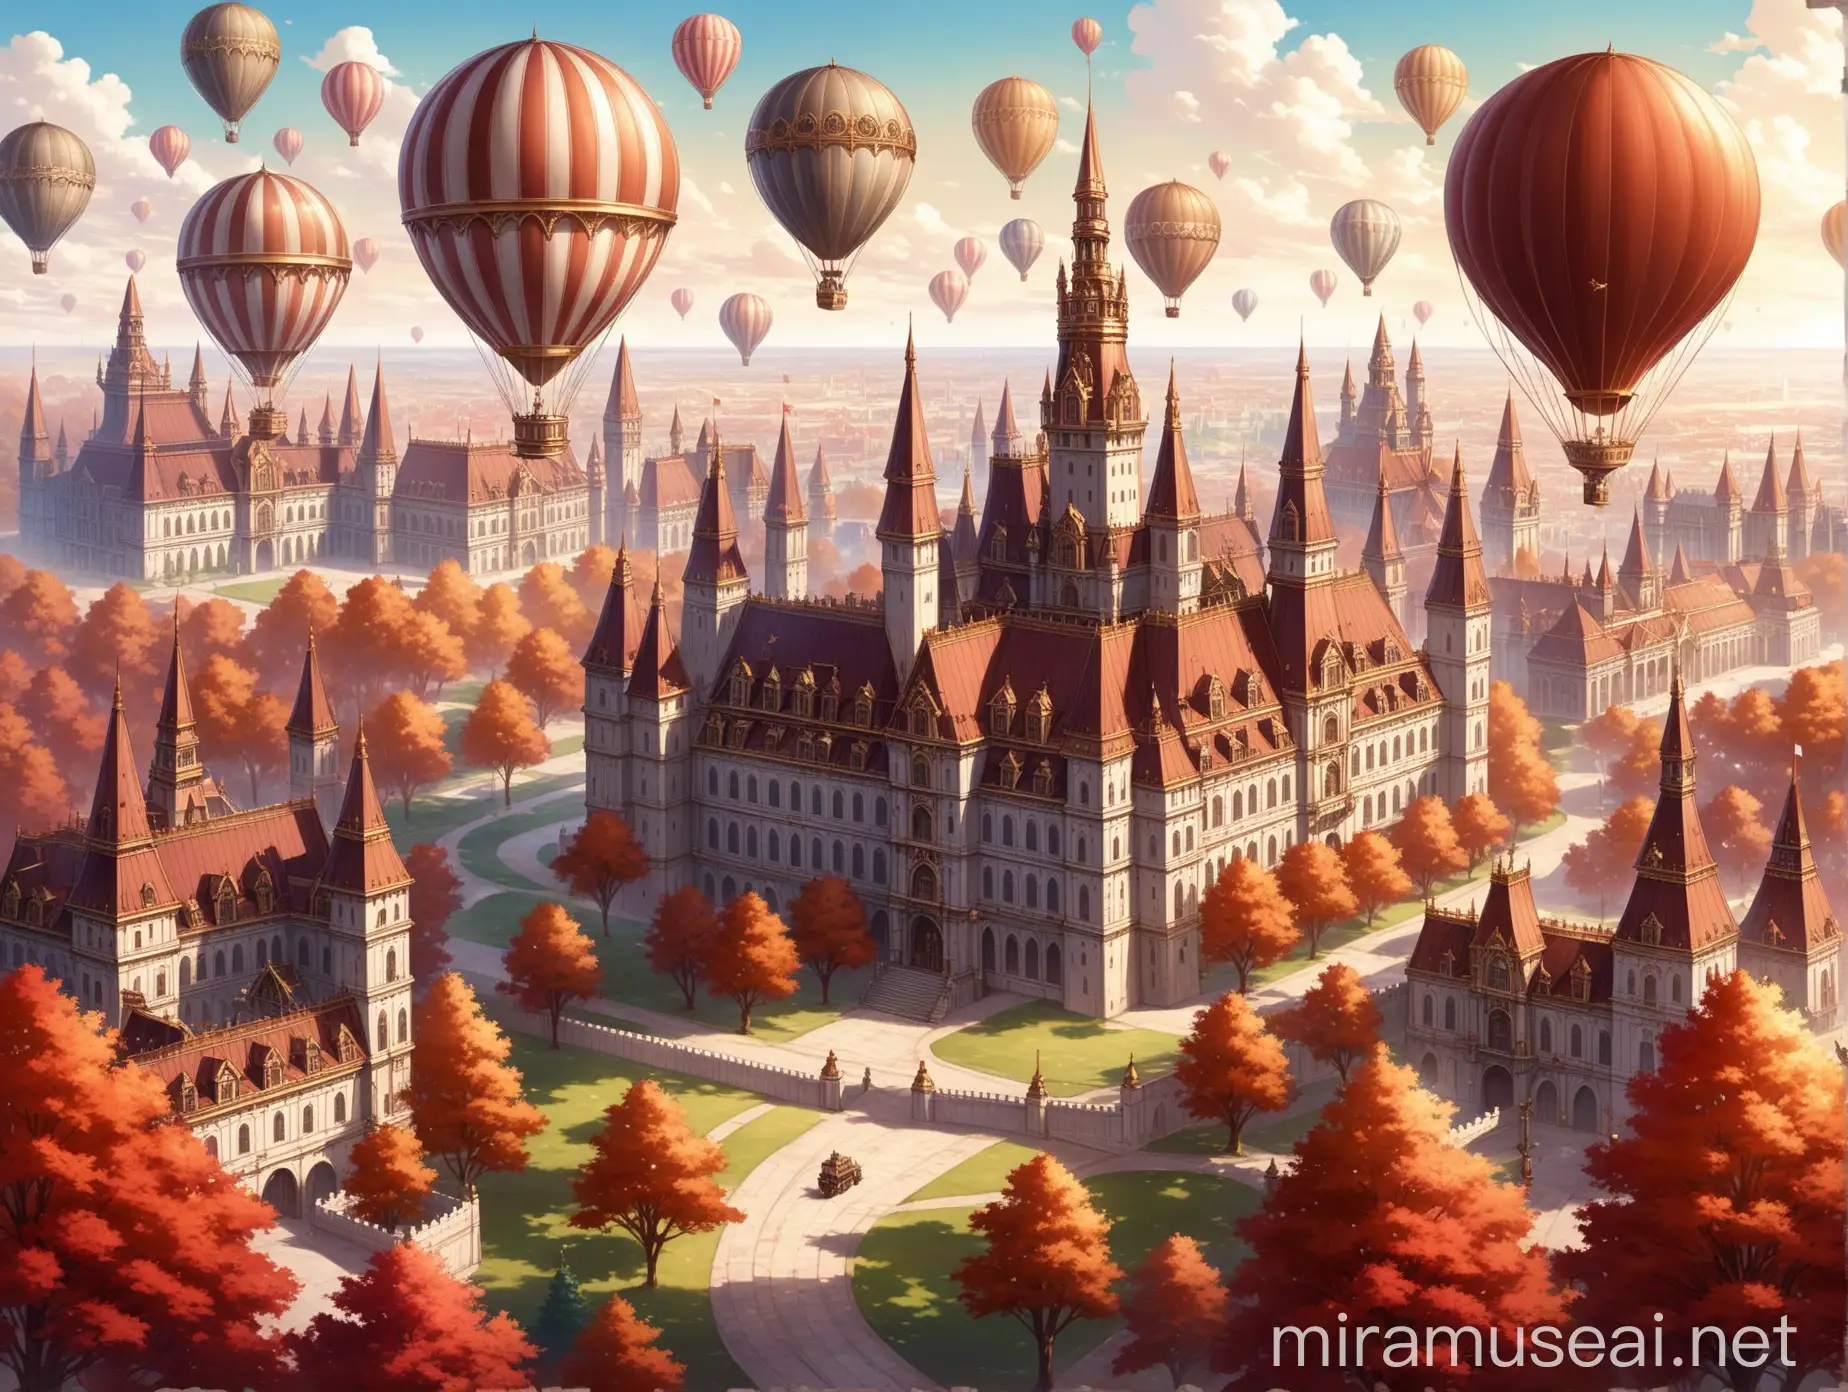 a victorian fantasy city with the royal palace at center of the city (the castle has red, white and bronze colors), the city is composed by beautiful steampunk houses around the royal palace, there are few colored hot air balloon in the air,  there are few elegant trees  in some peripheral zones